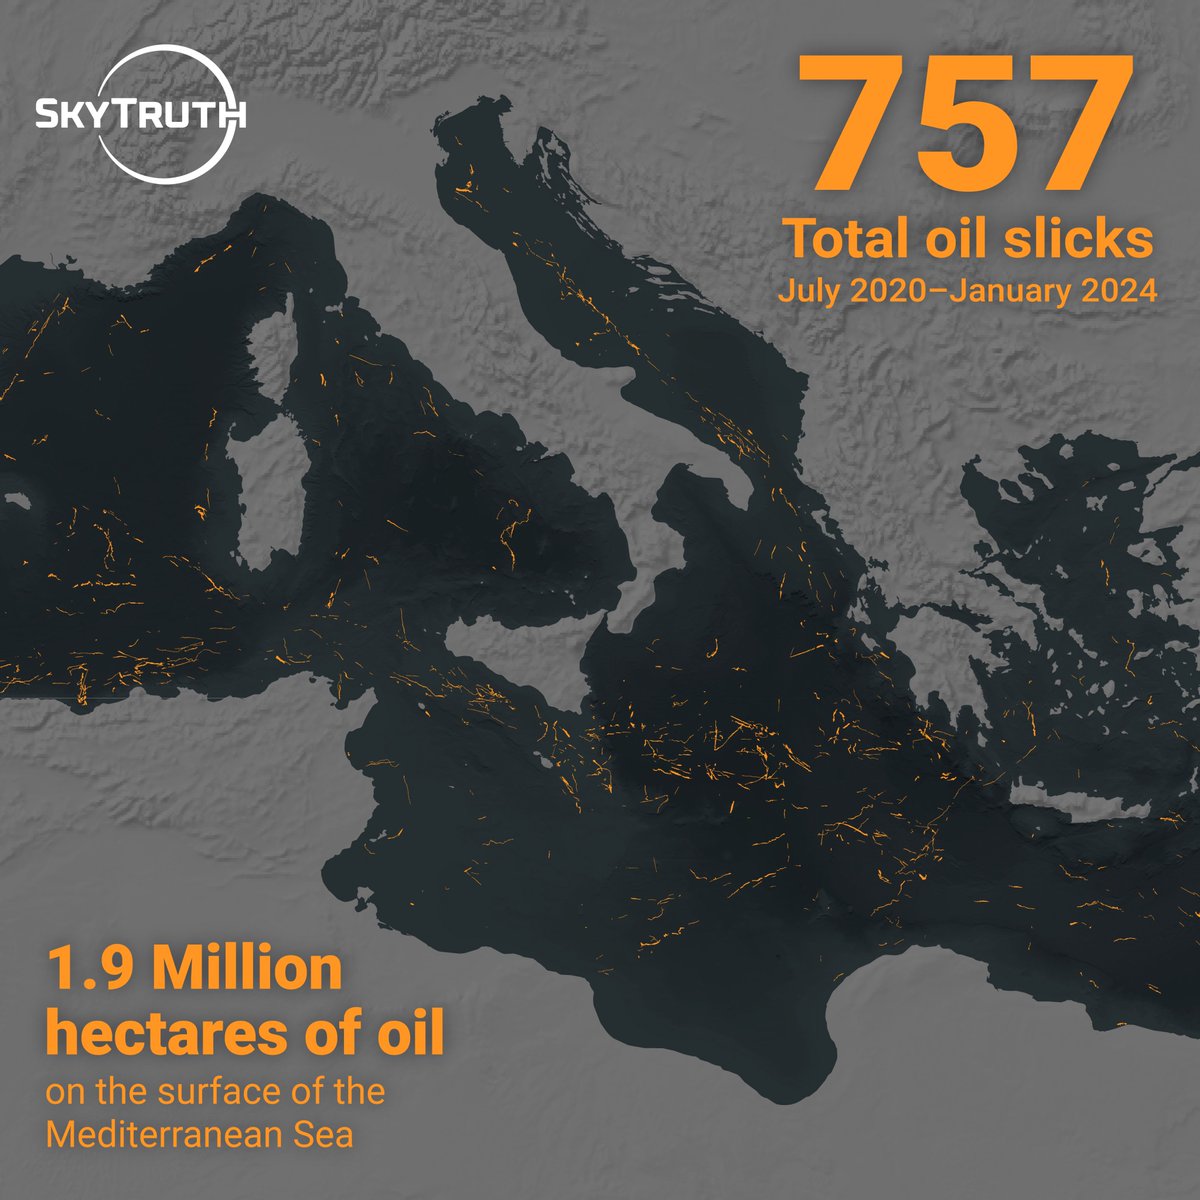 New SkyTruth report released at #OurOcean2024 finds 750+ oil slicks in the Mediterranean Sea from July 2020-January 2024, revealing chronic pollution problem. #SkyTruth #Cerulean #sustainability #nowheretohide Read all about it here: wp.me/p9Qu4m-aSd